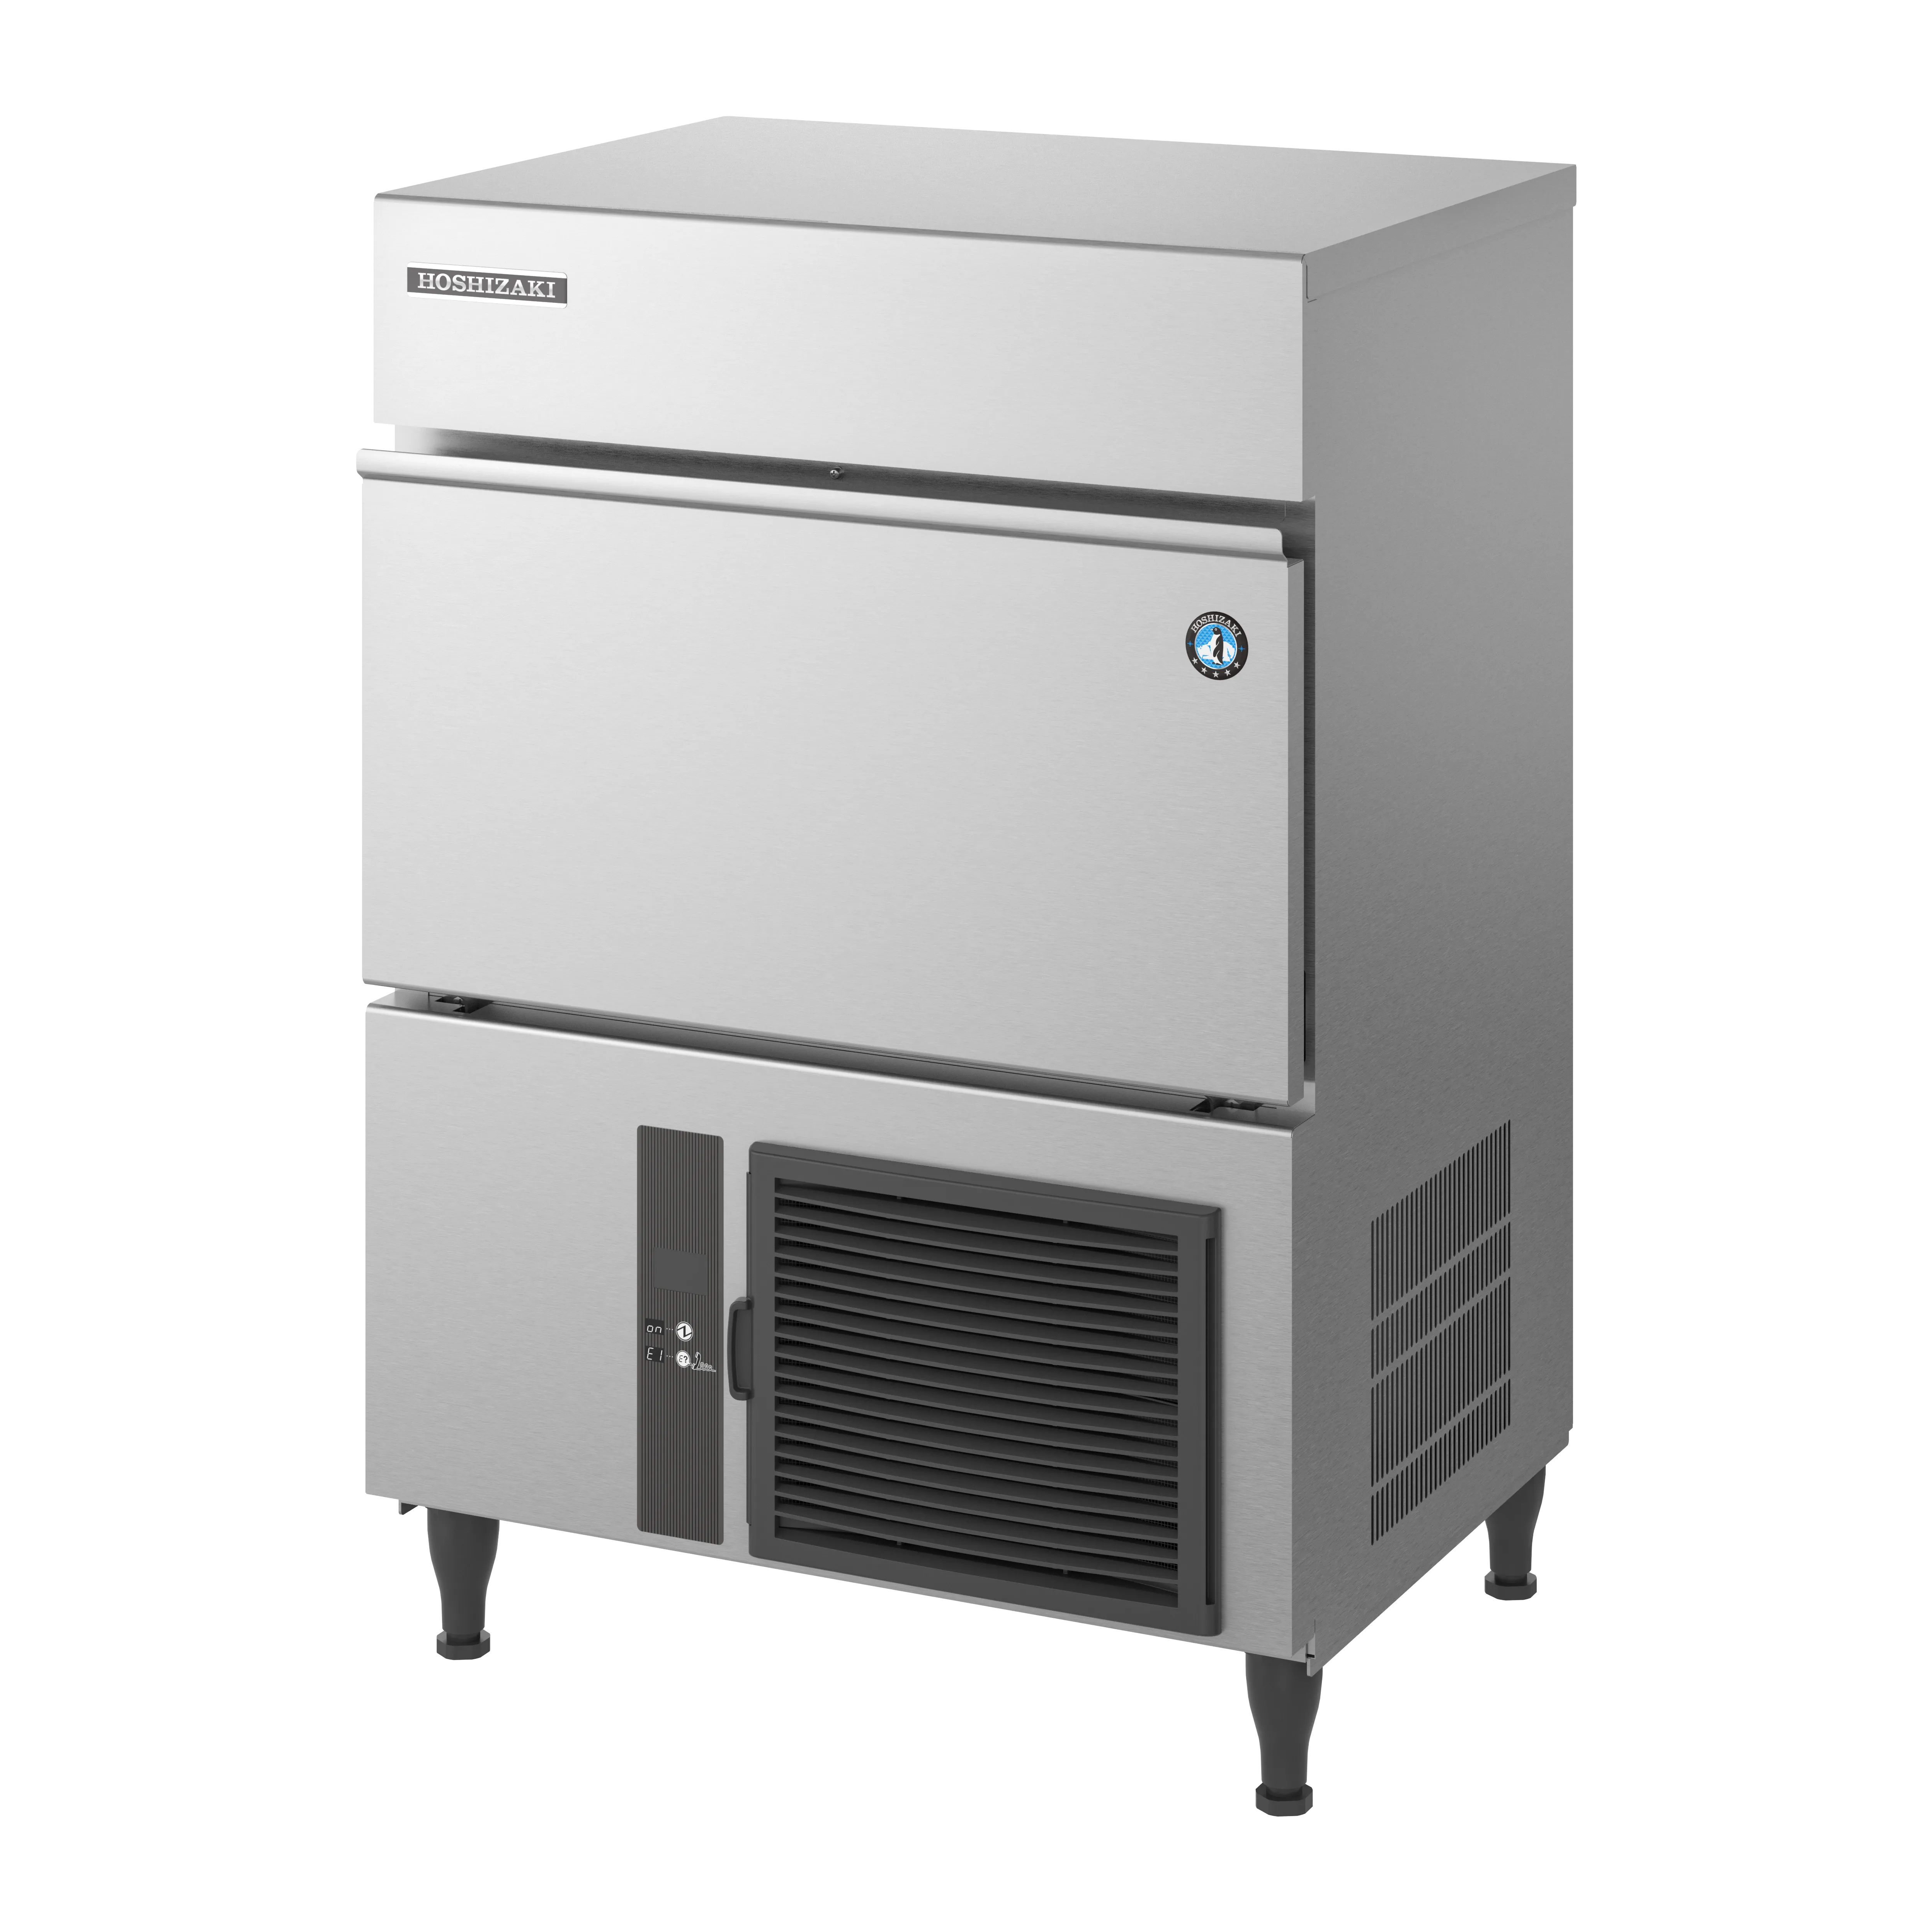 Hoshizaki IM-65WNE Self Contained Cube Ice Maker, 63kg/24hrs